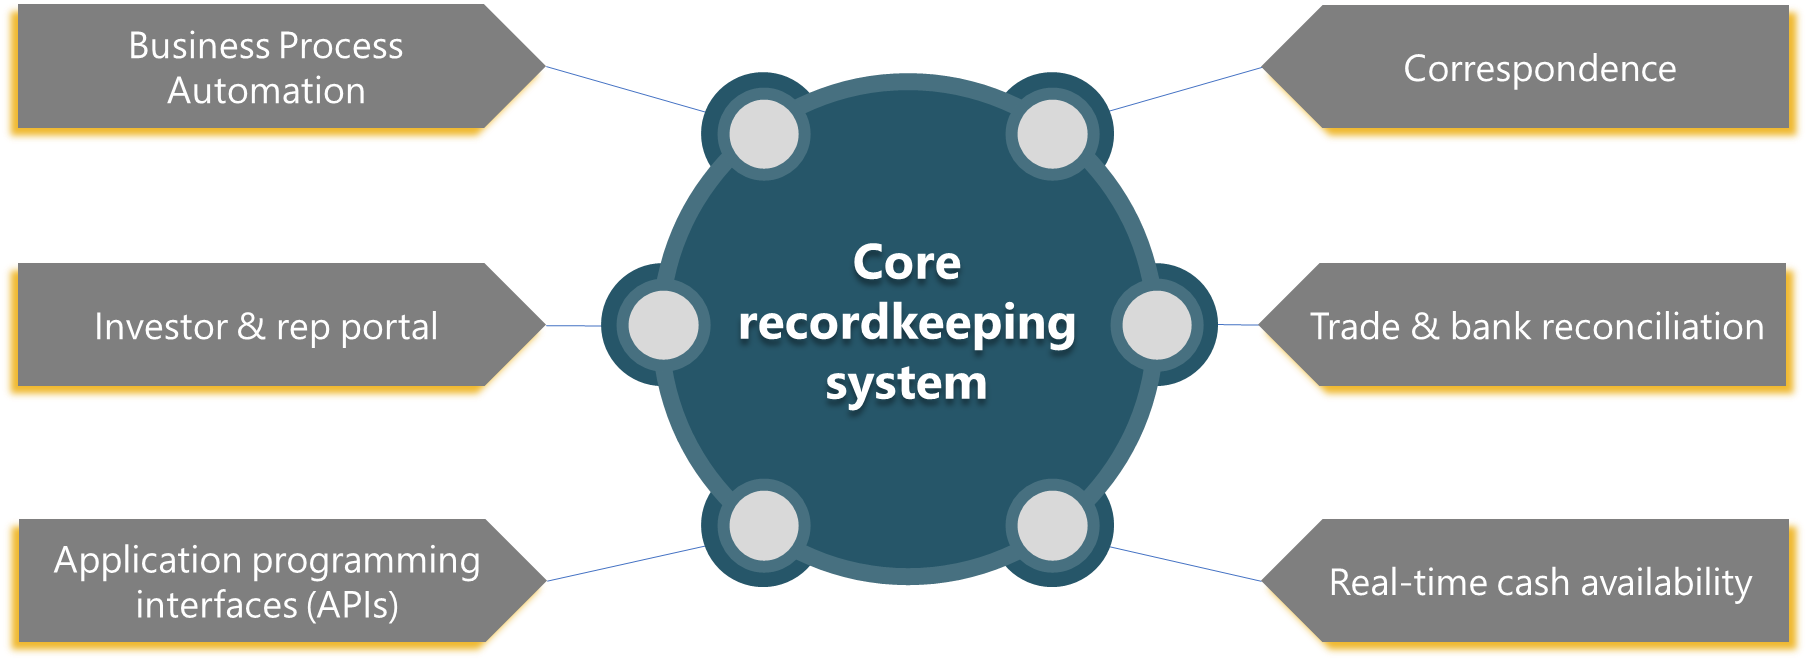 Envision's core recordkeeping system and its add-on modules